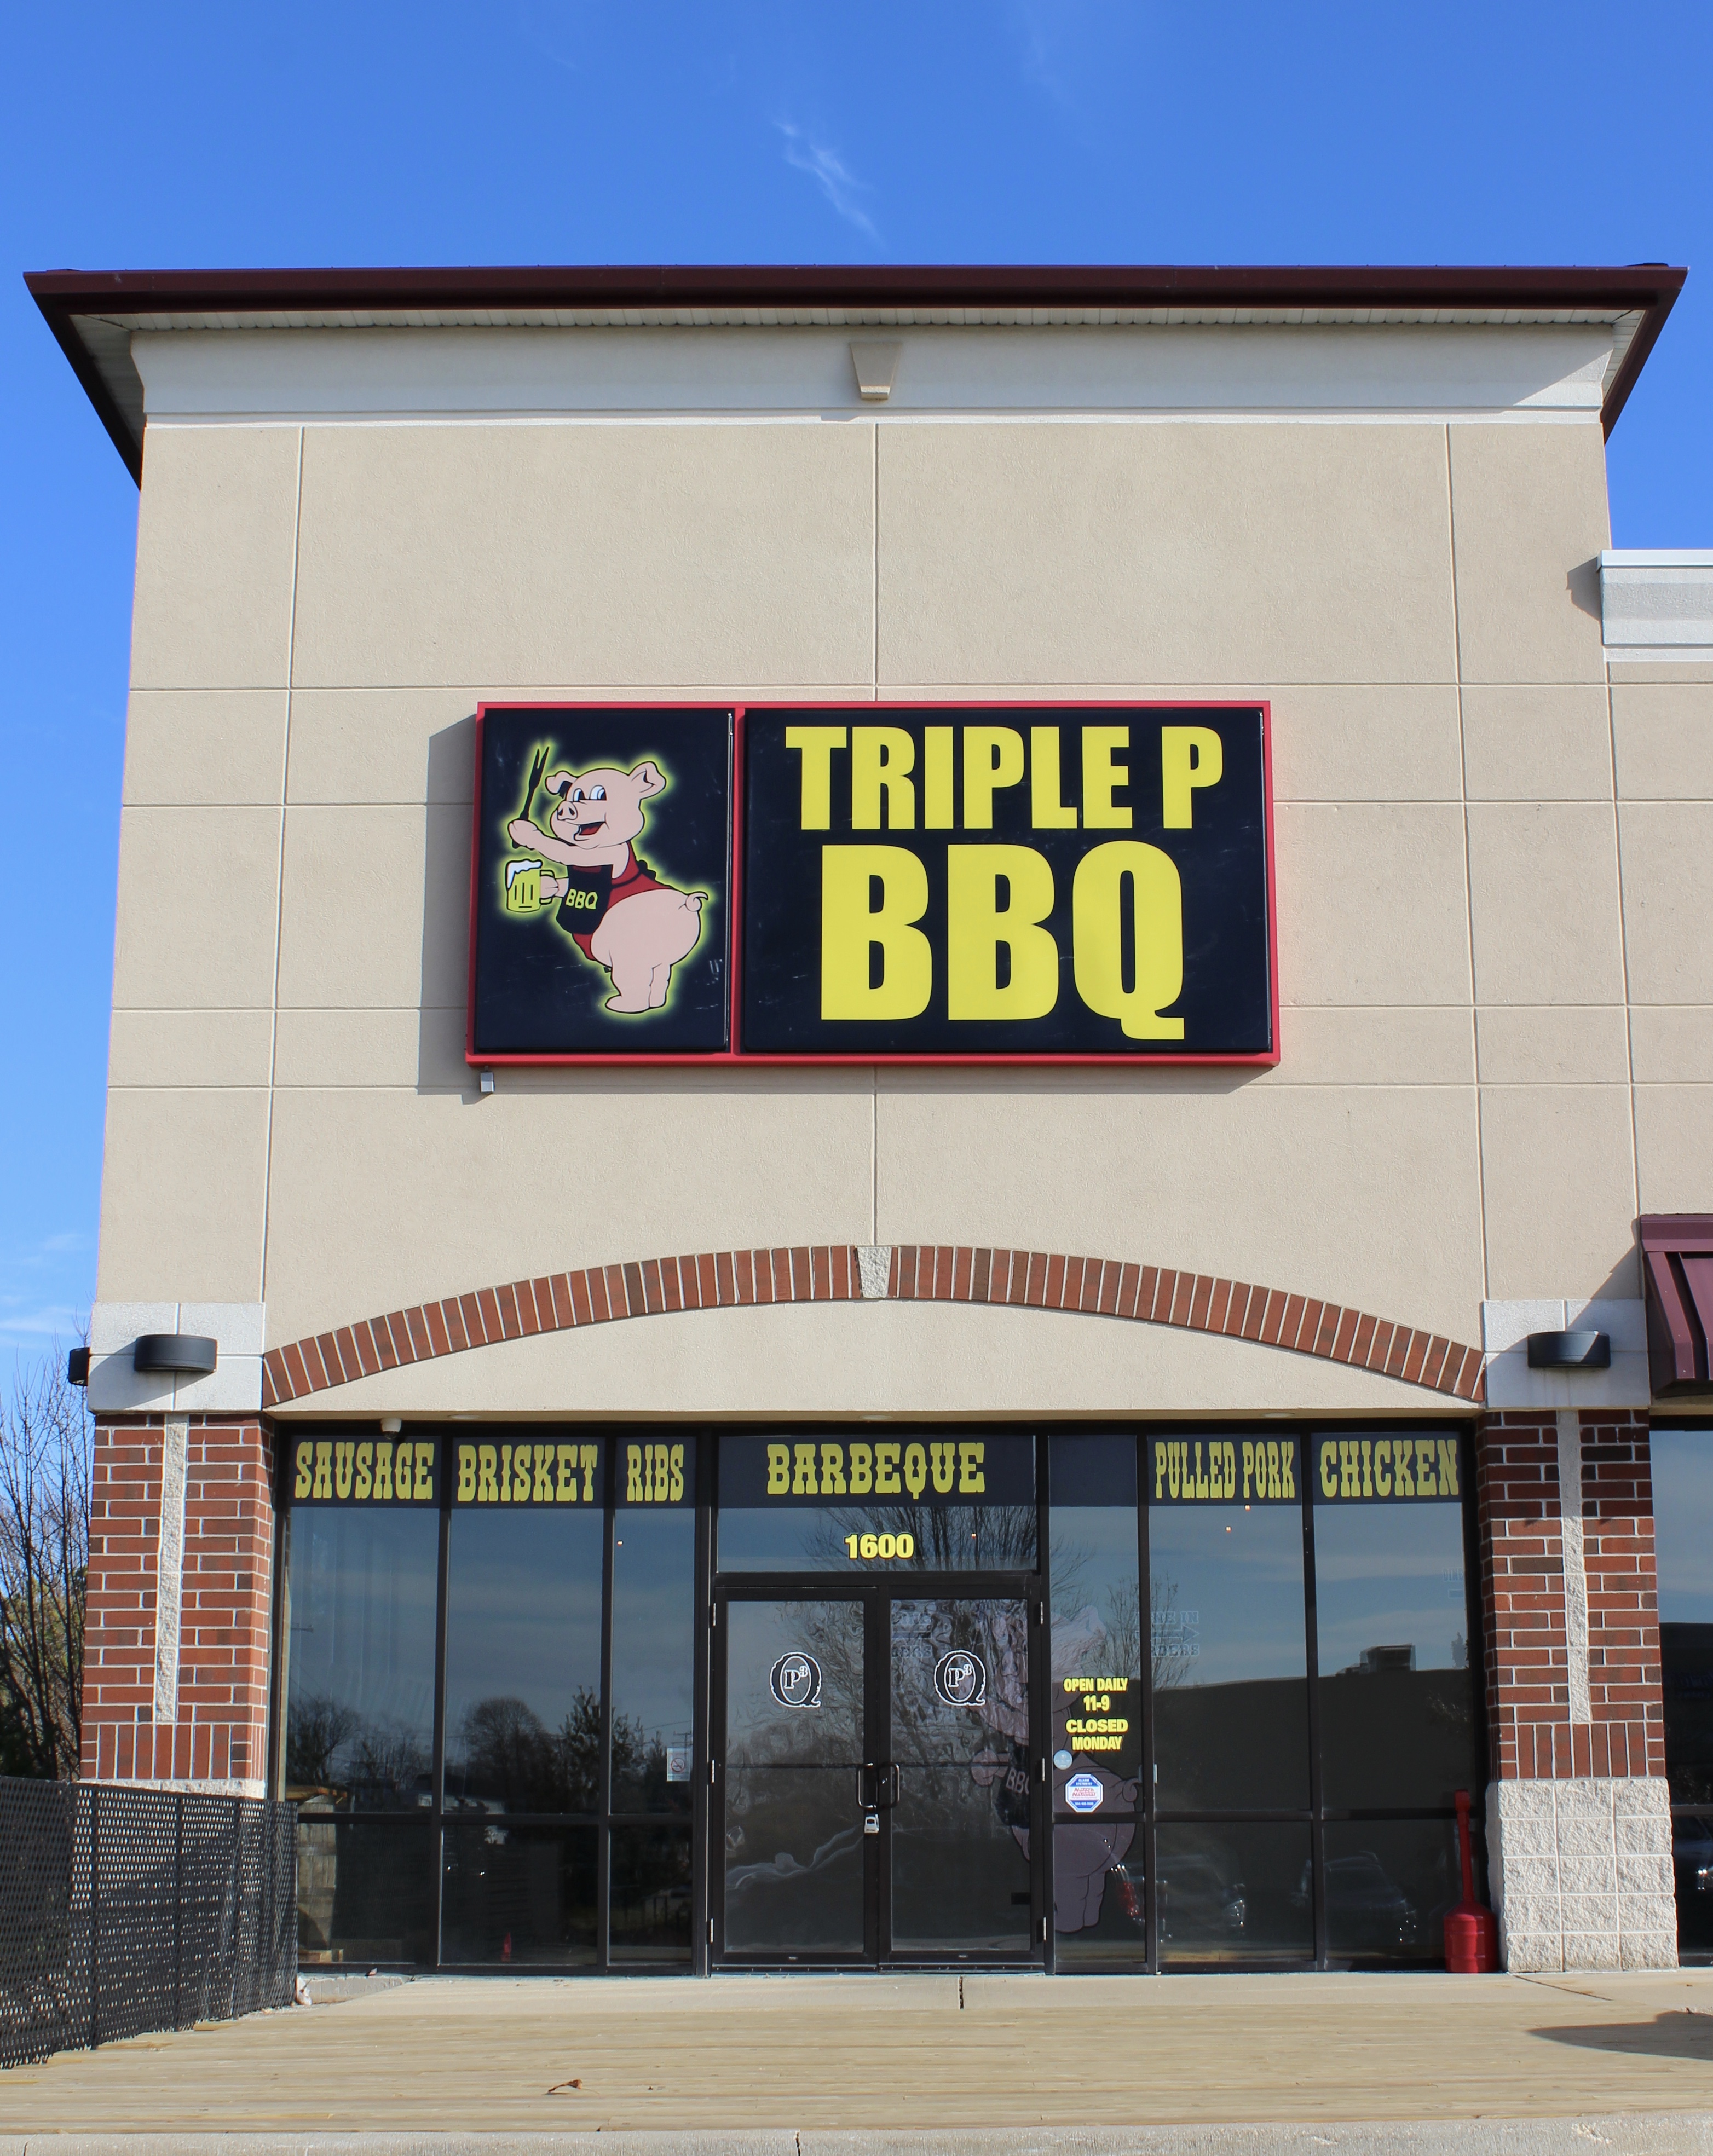 Triple P BBQ opens a new location in Dixon IL during the Covid-19 pandemic.